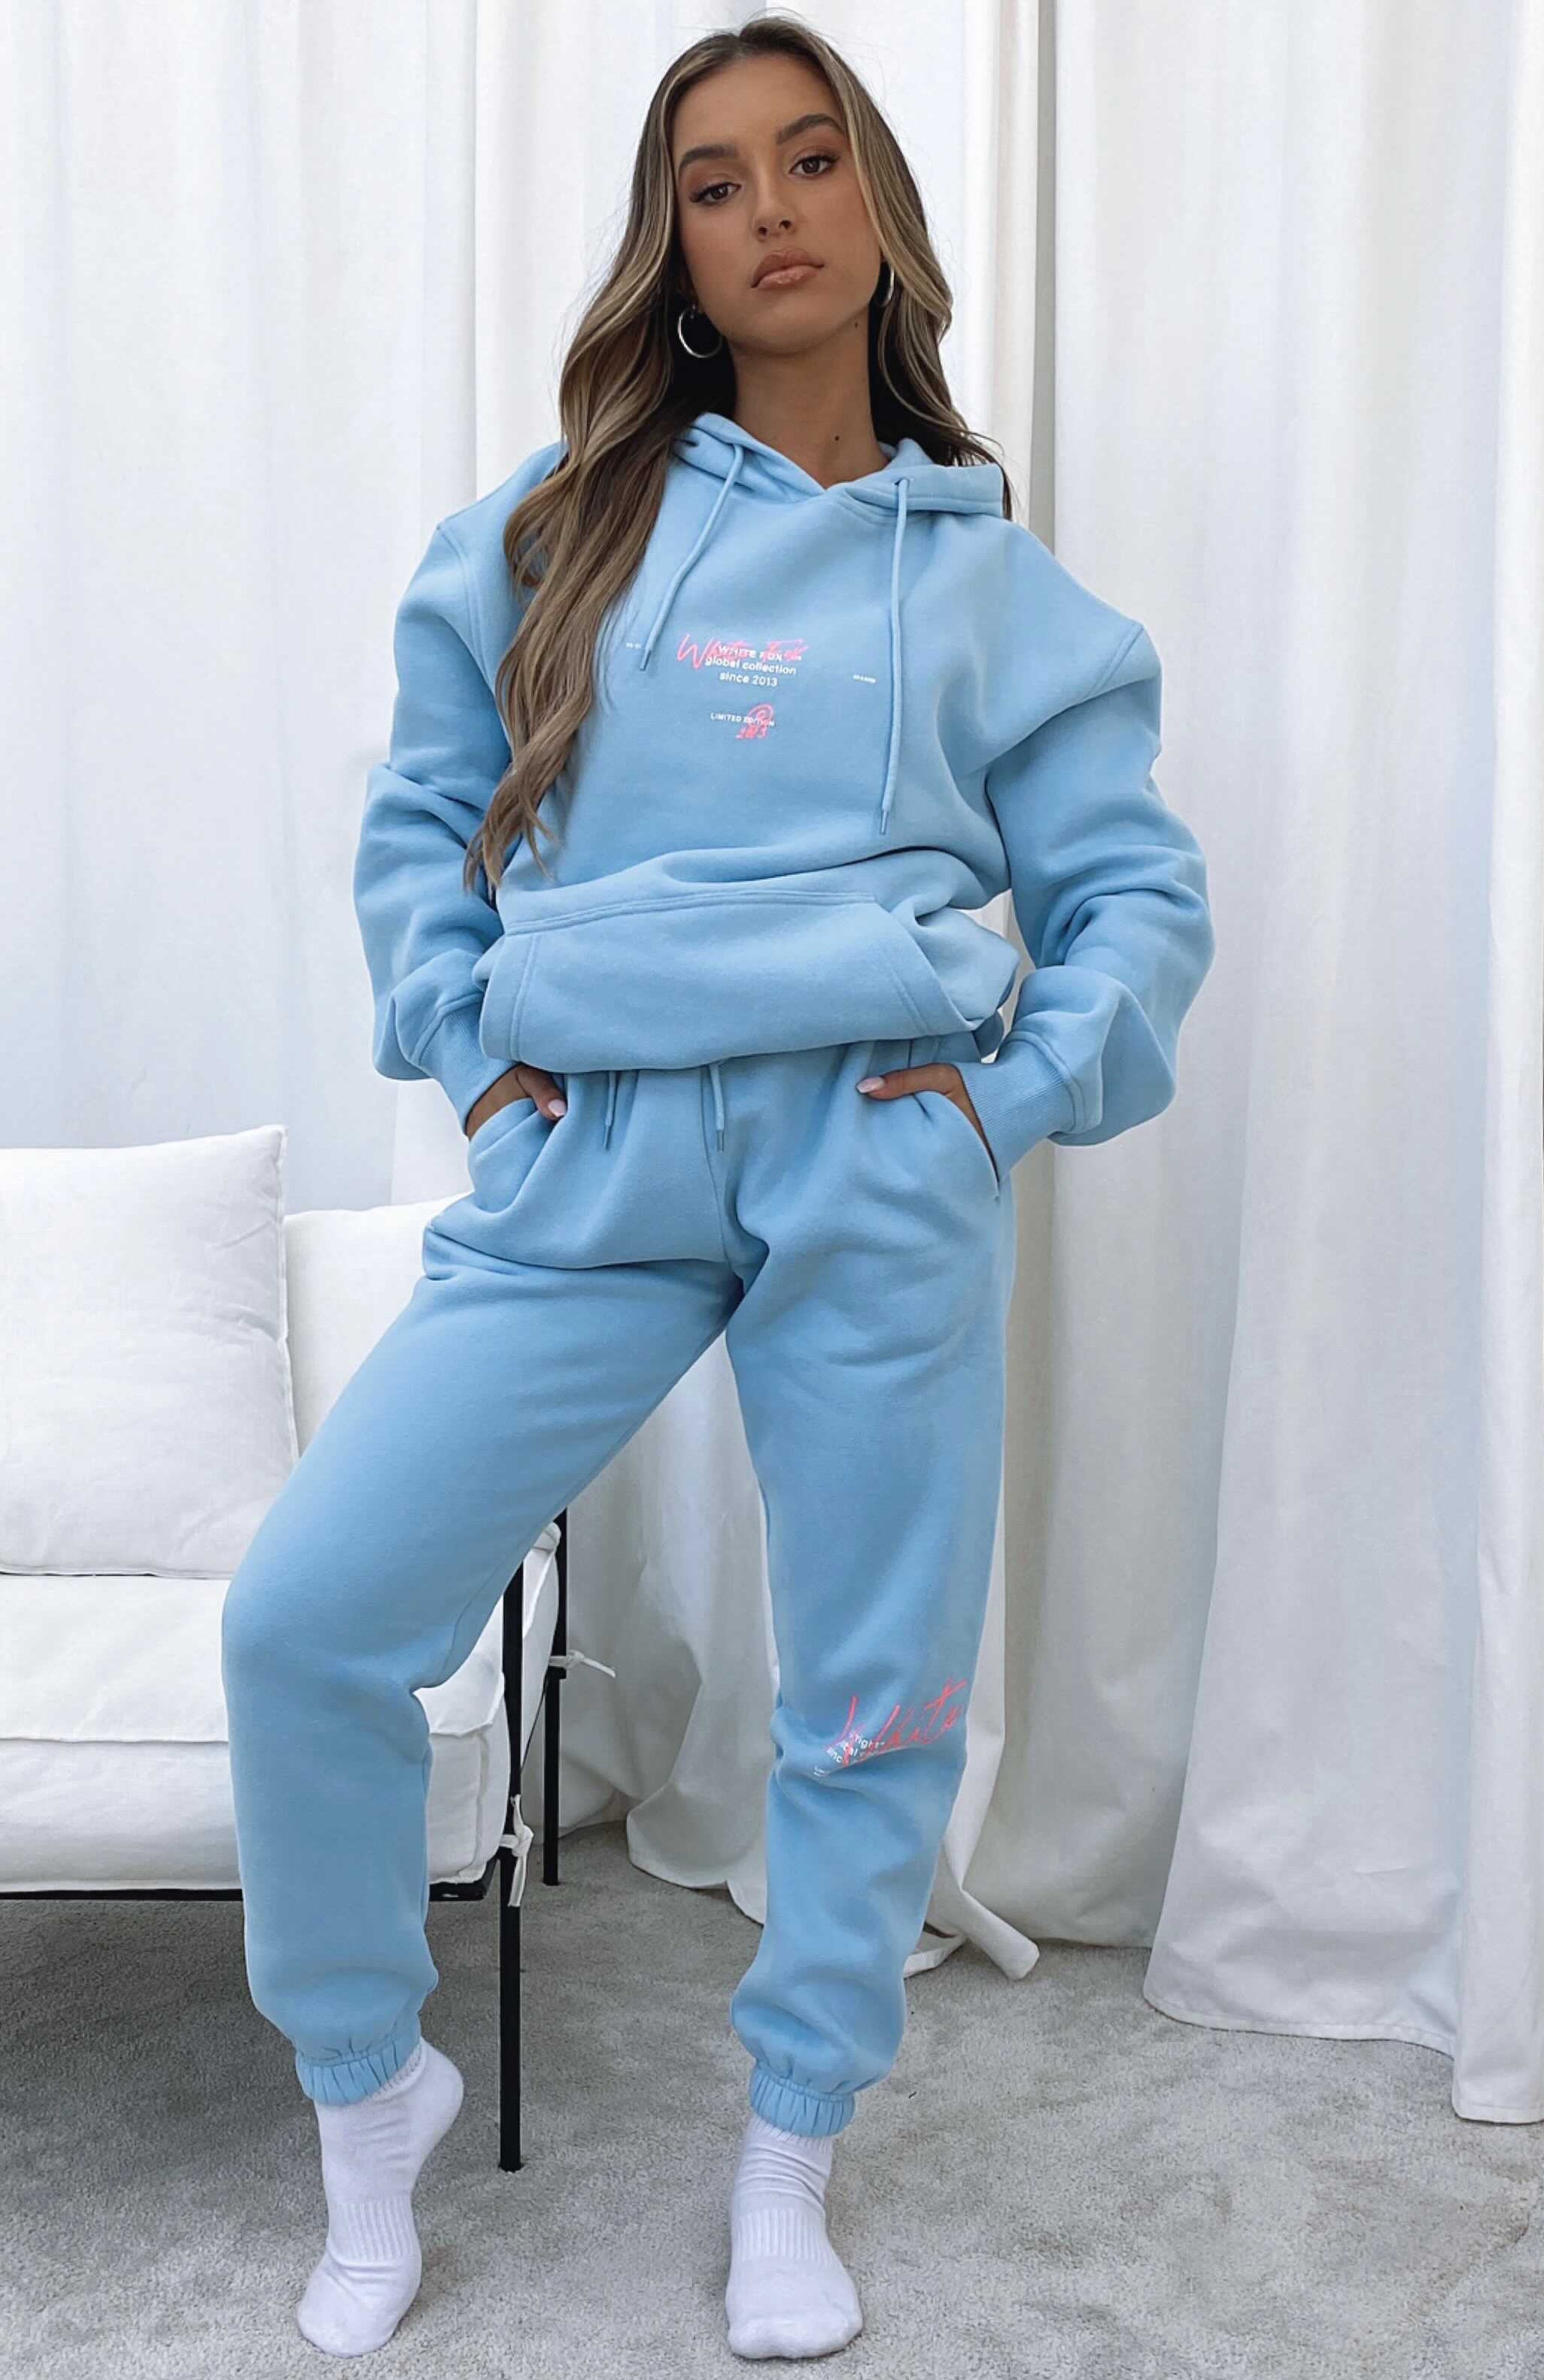 New Story Sweatpants Baby Blue | White Fox Boutique US